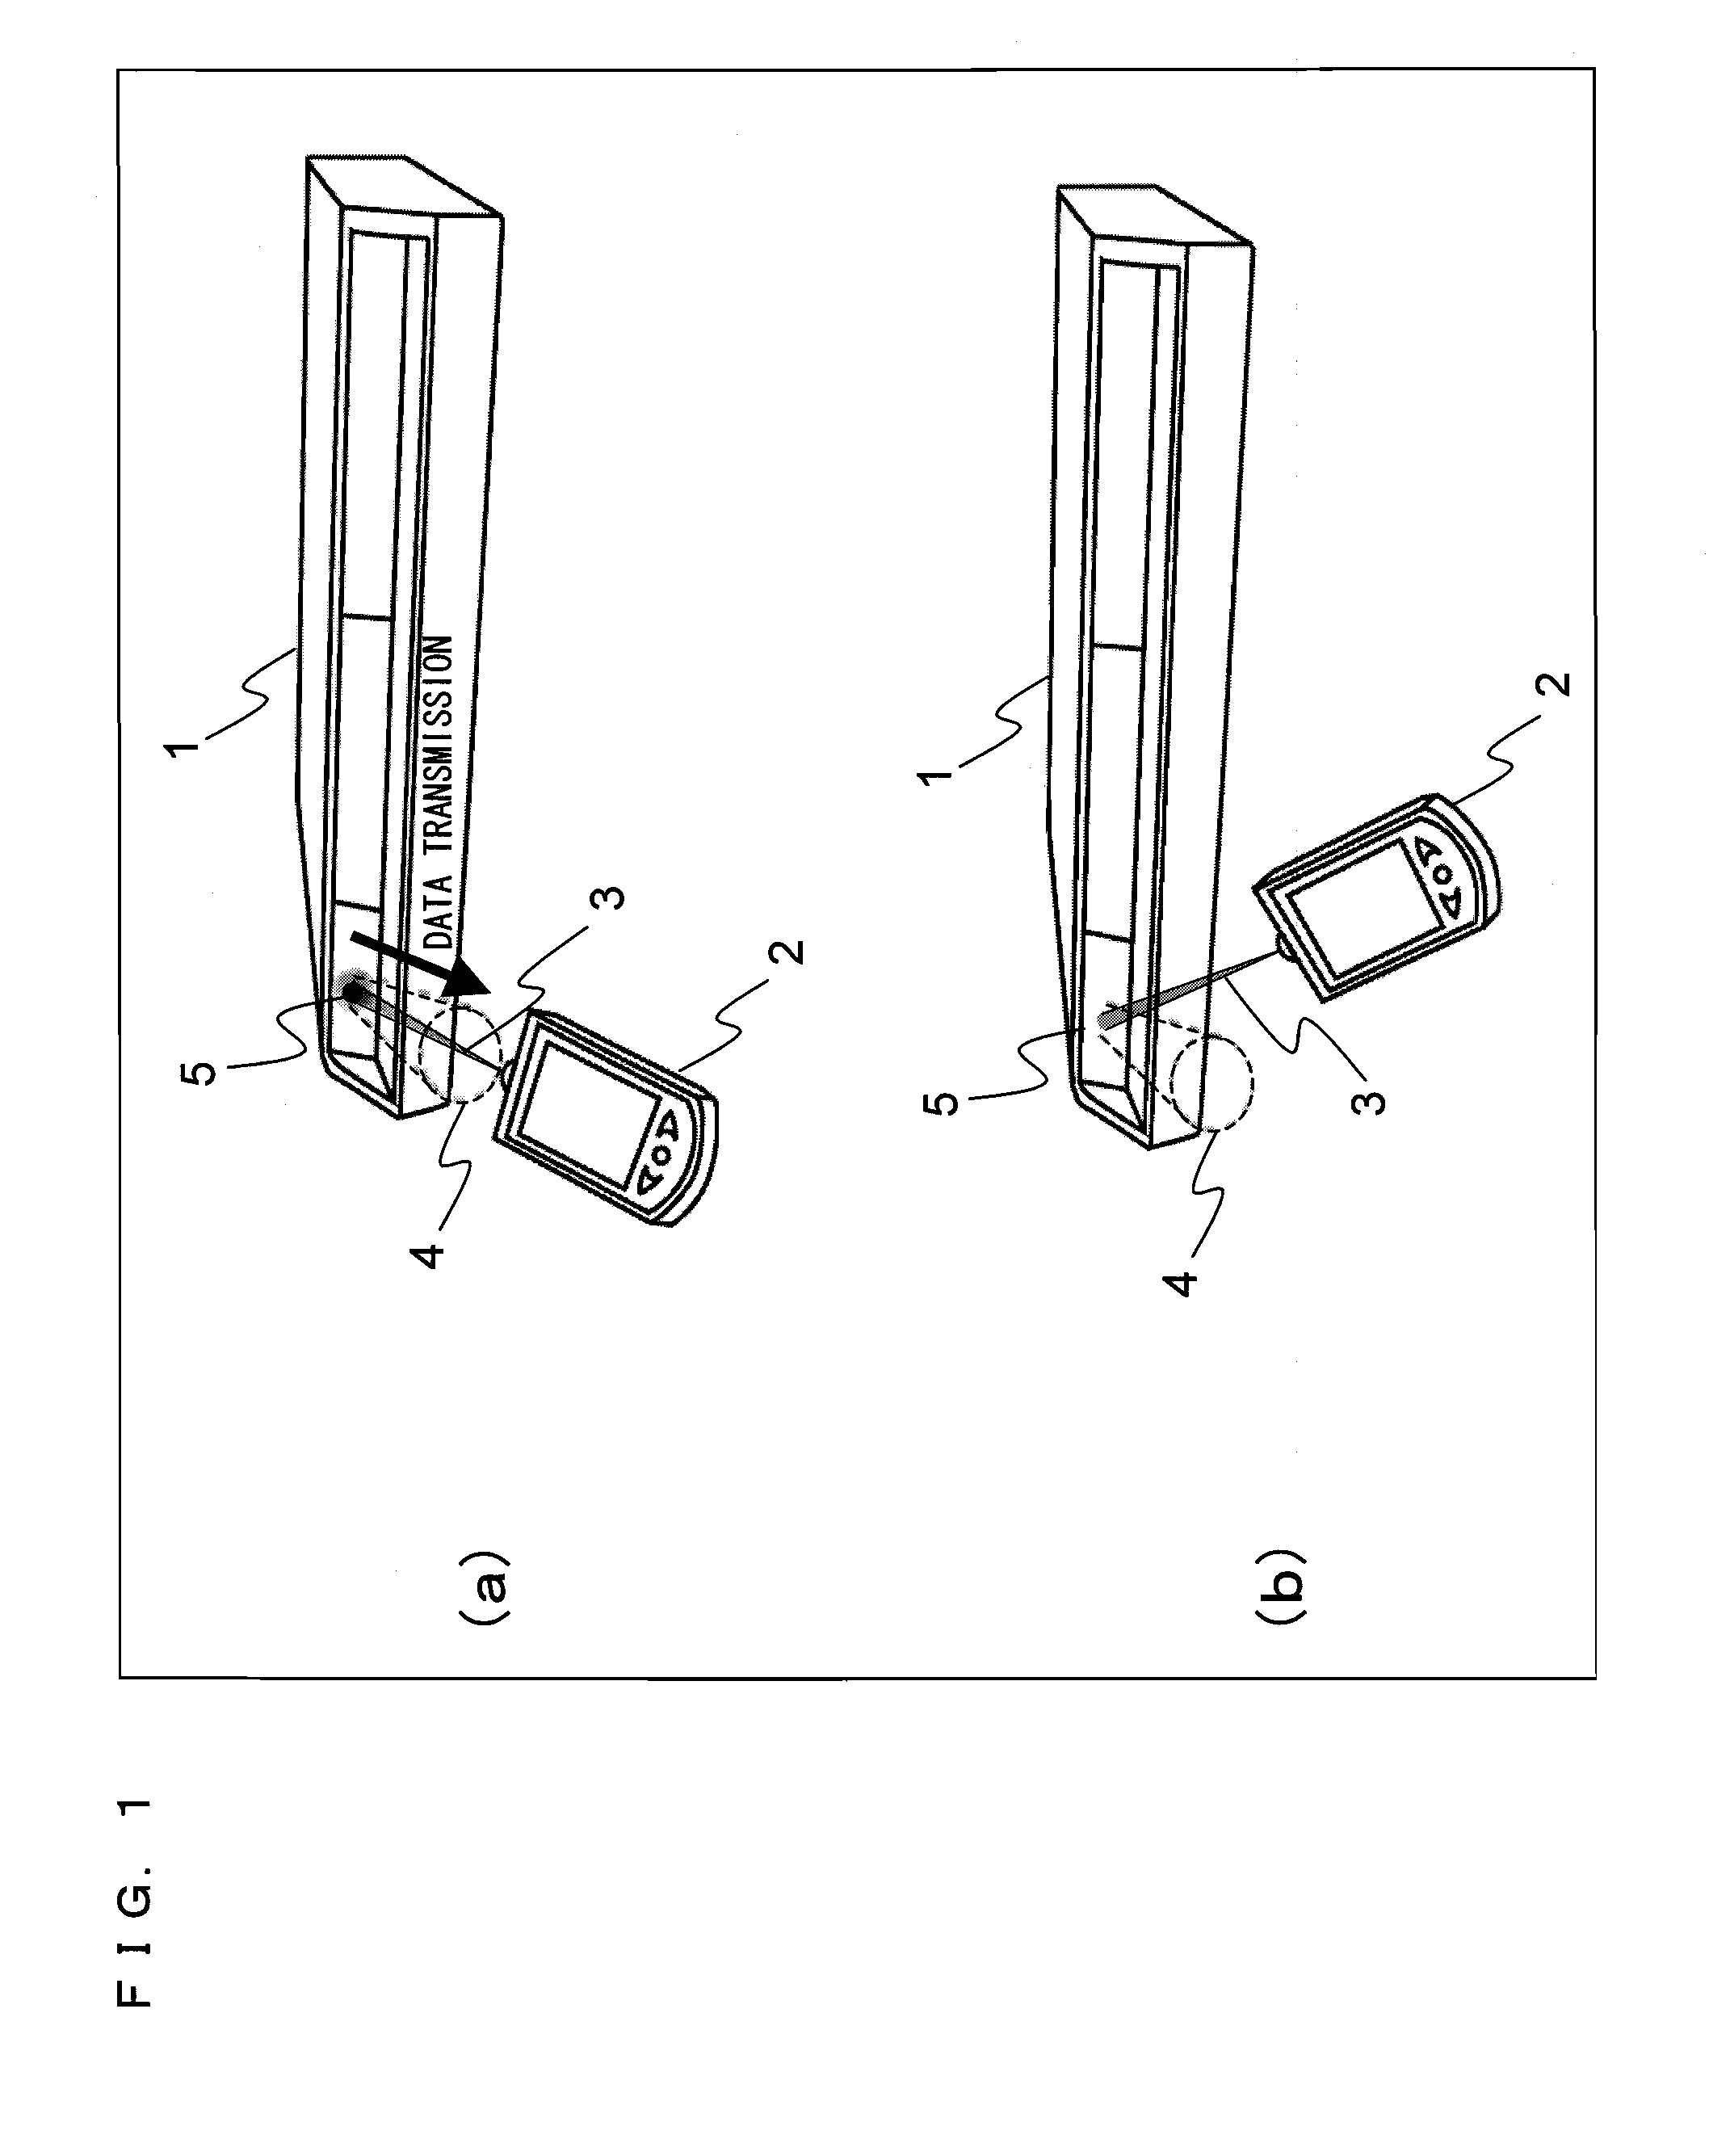 Optical wireless transmission system for performing optical space transmission, and optical transmitter used therein